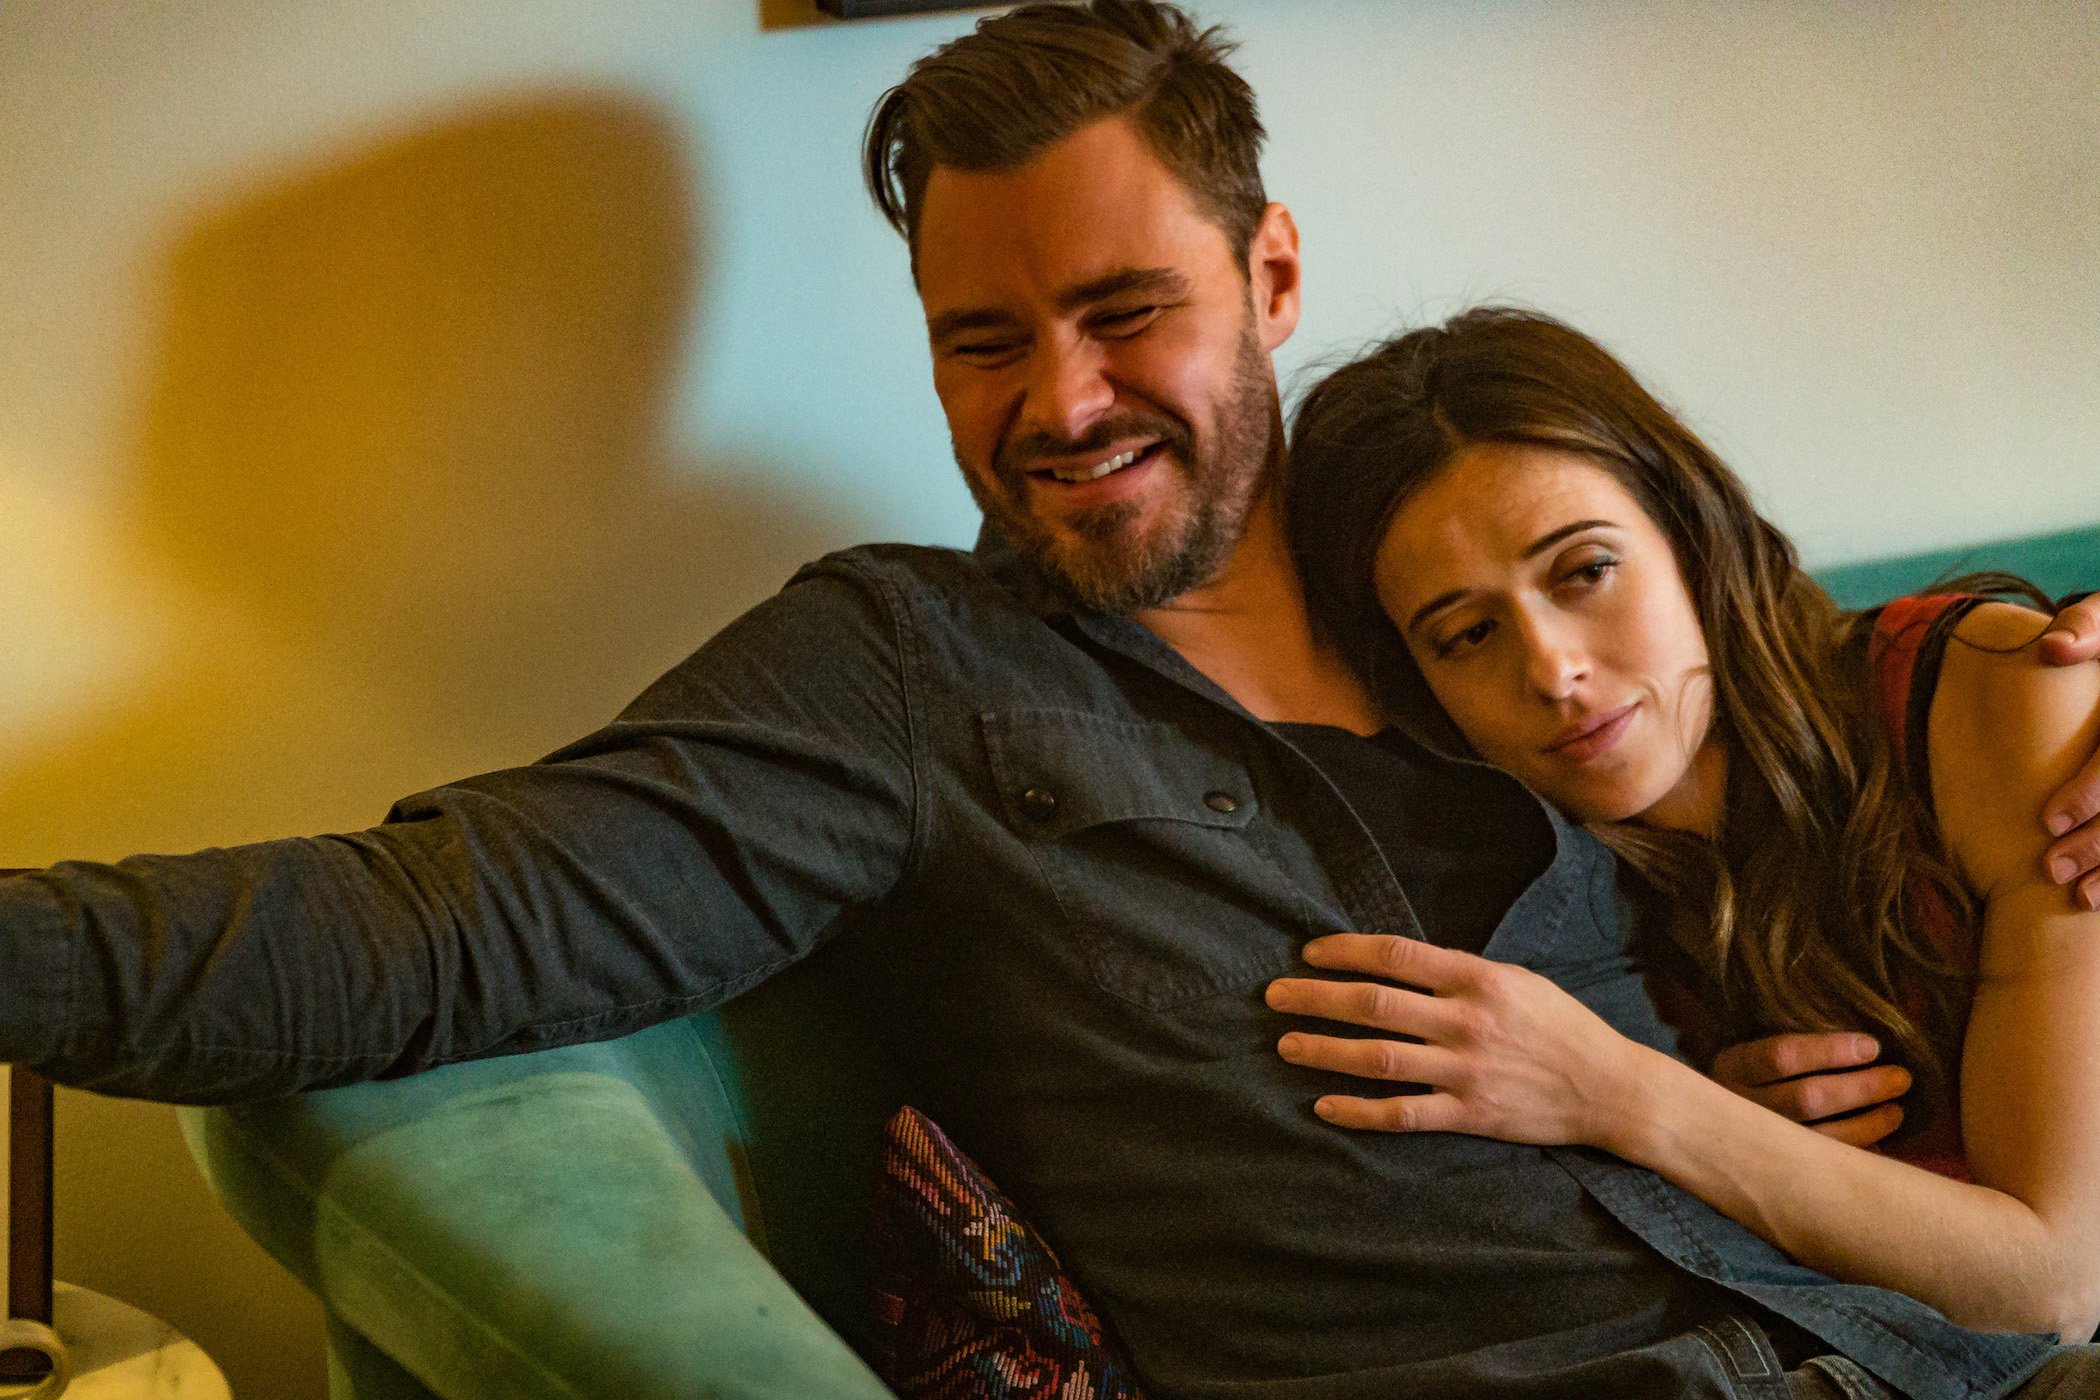 Adam Ruzek and Kim Burgess from 'Chicago P.D.' Season 9 cuddling together on a couch